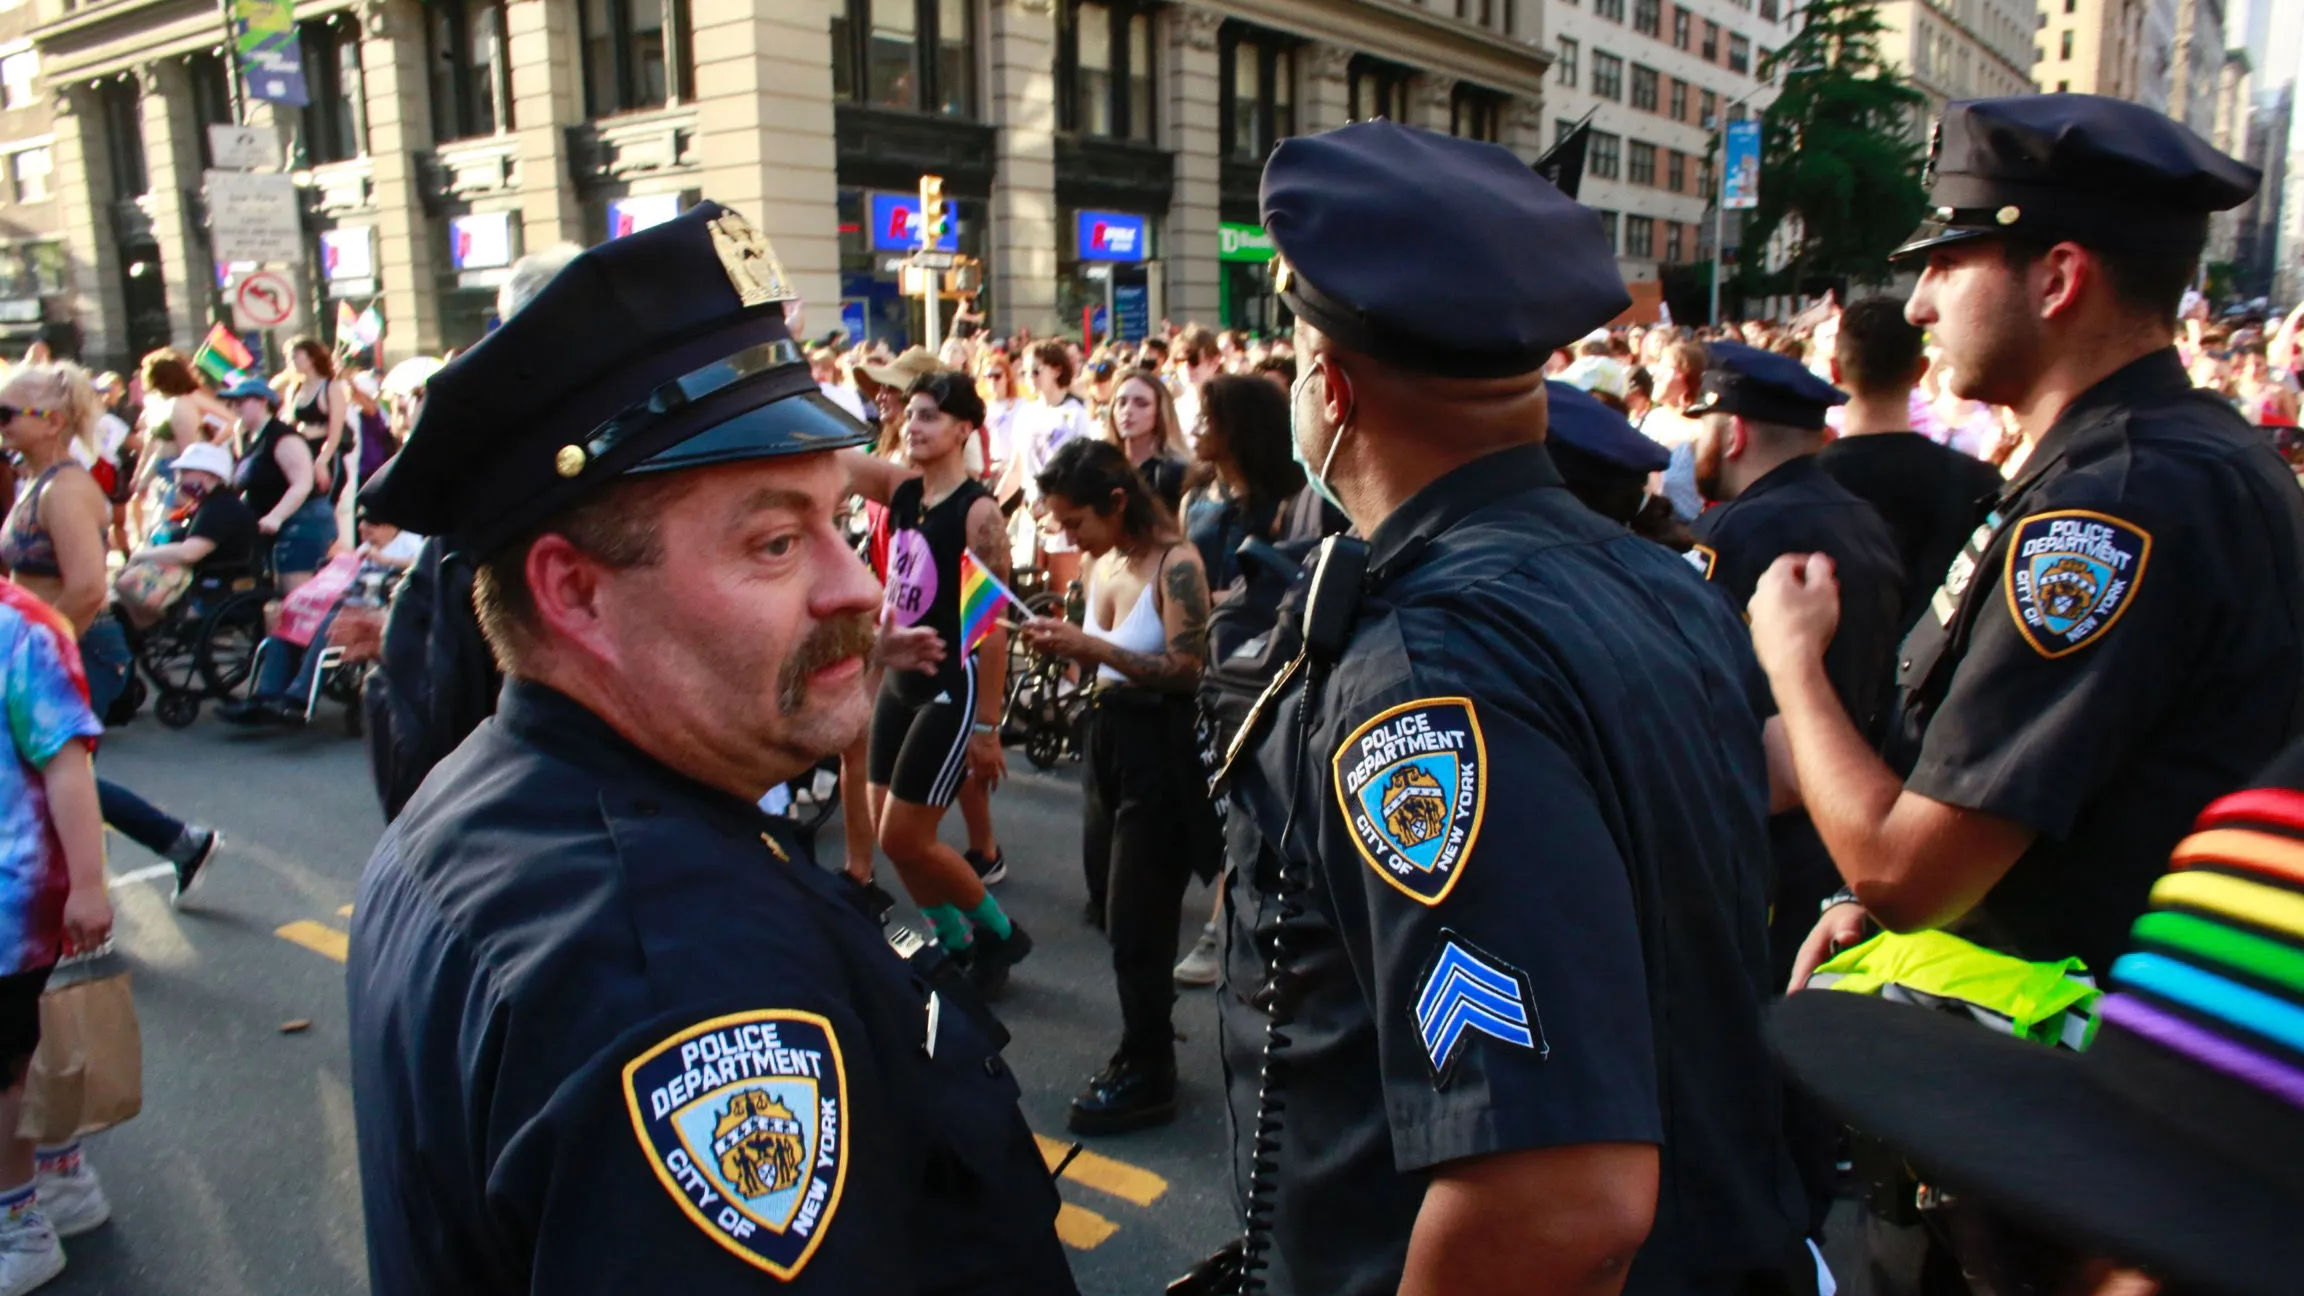 ‘Taking a part of me away’: NYPD officers on being banned from Pride March